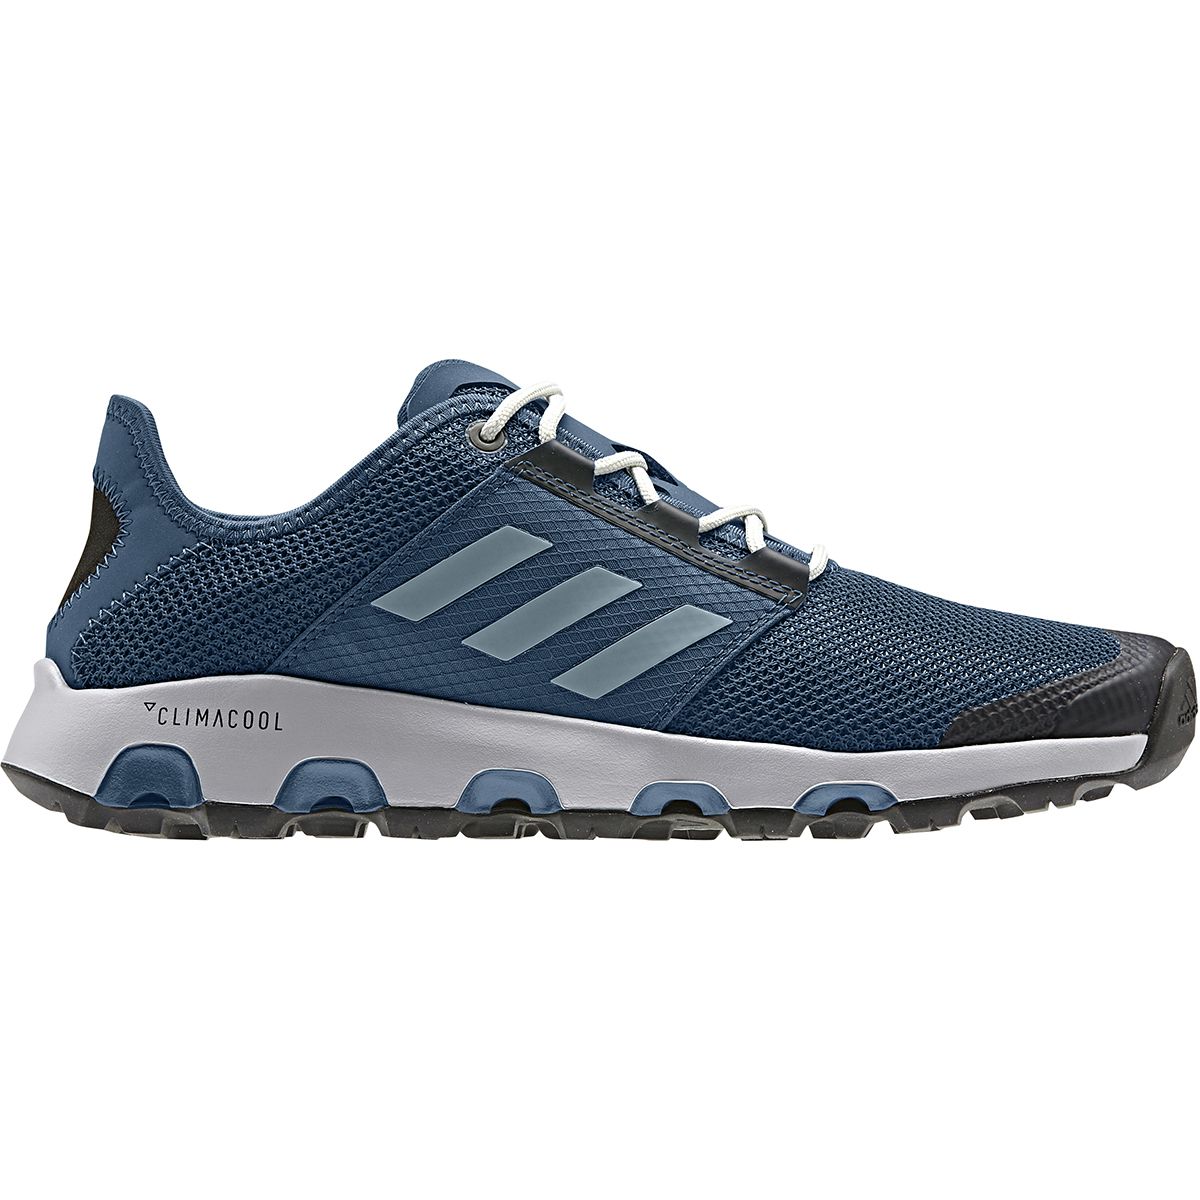 adidas outdoor climacool voyager boat shoe men's